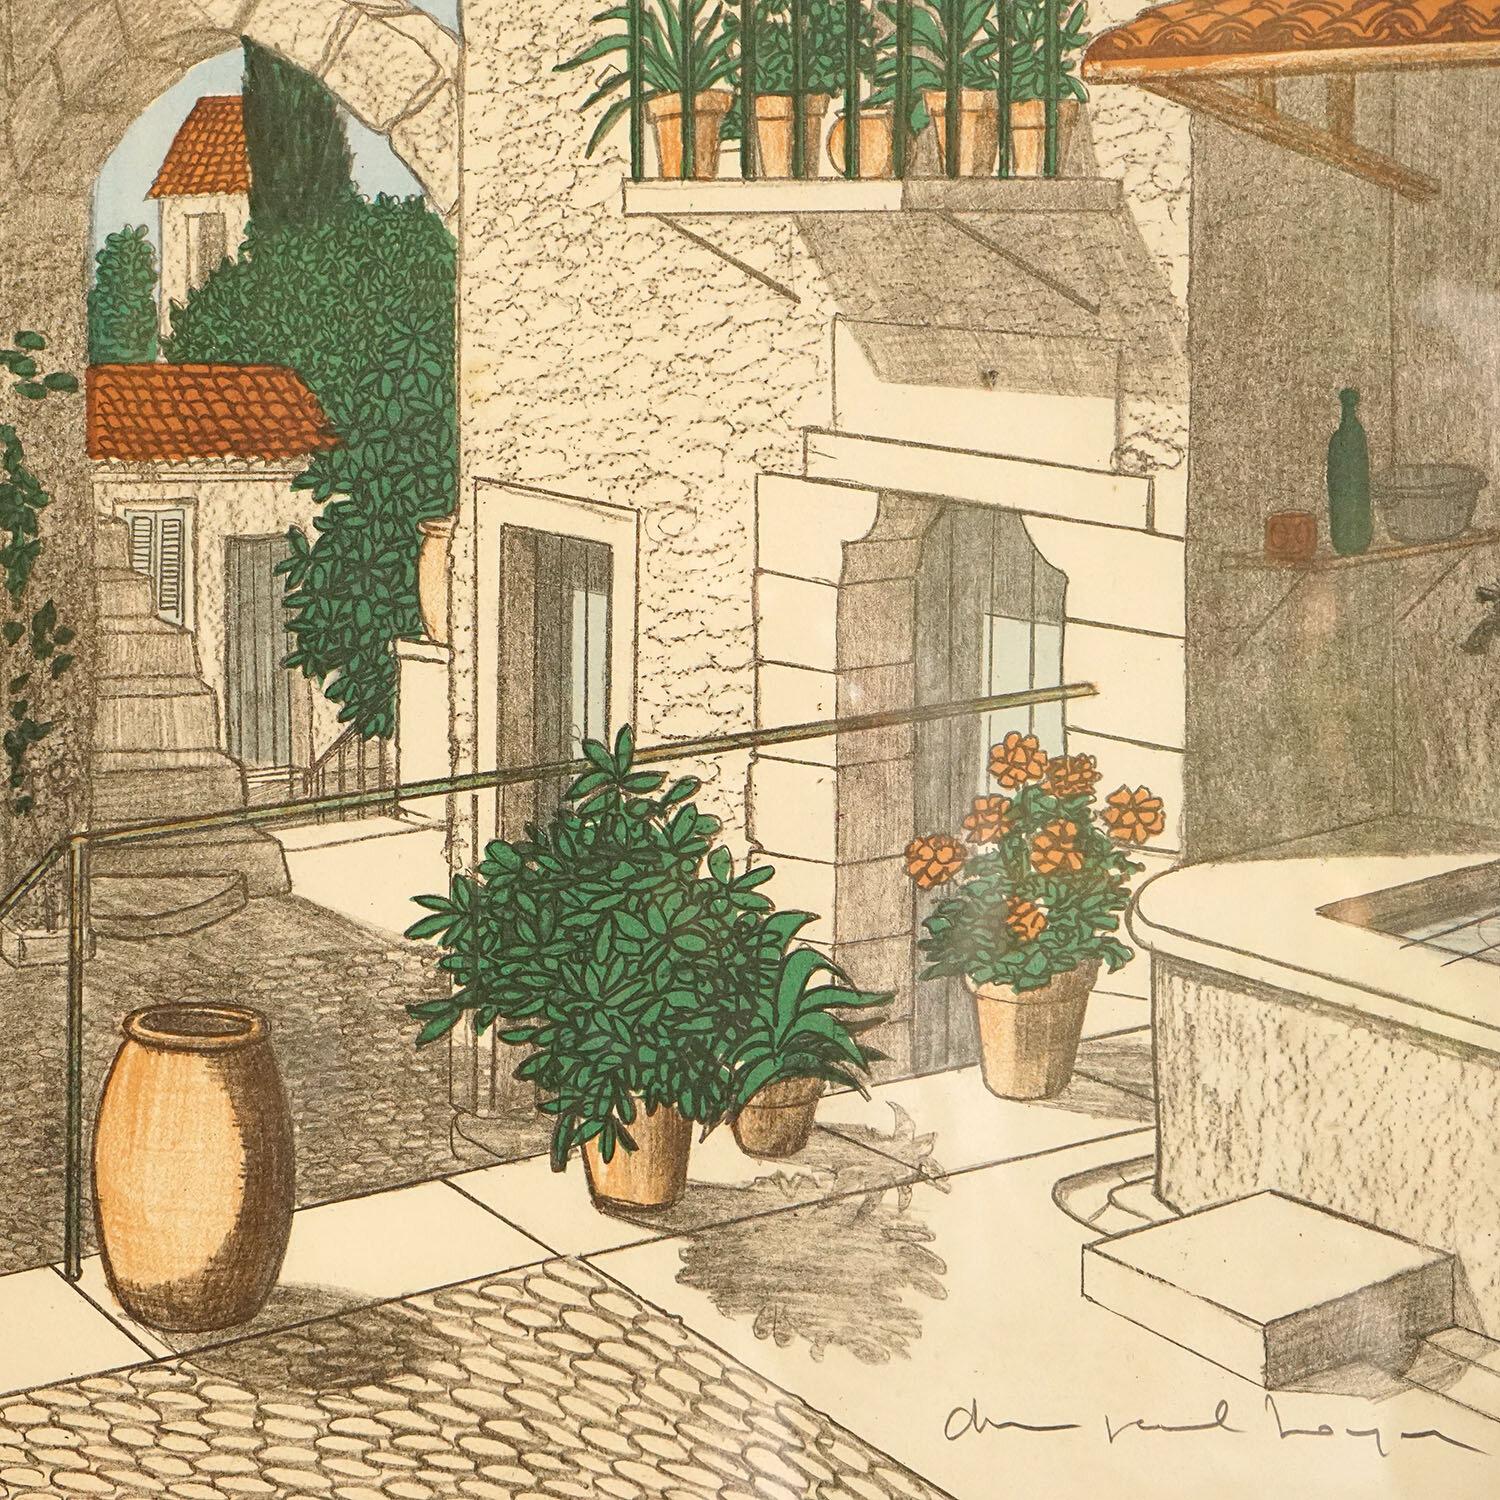 French Mediterranean Village Scene By Denis Paul Noyer, Vintage Signed Lithograph 1970s For Sale